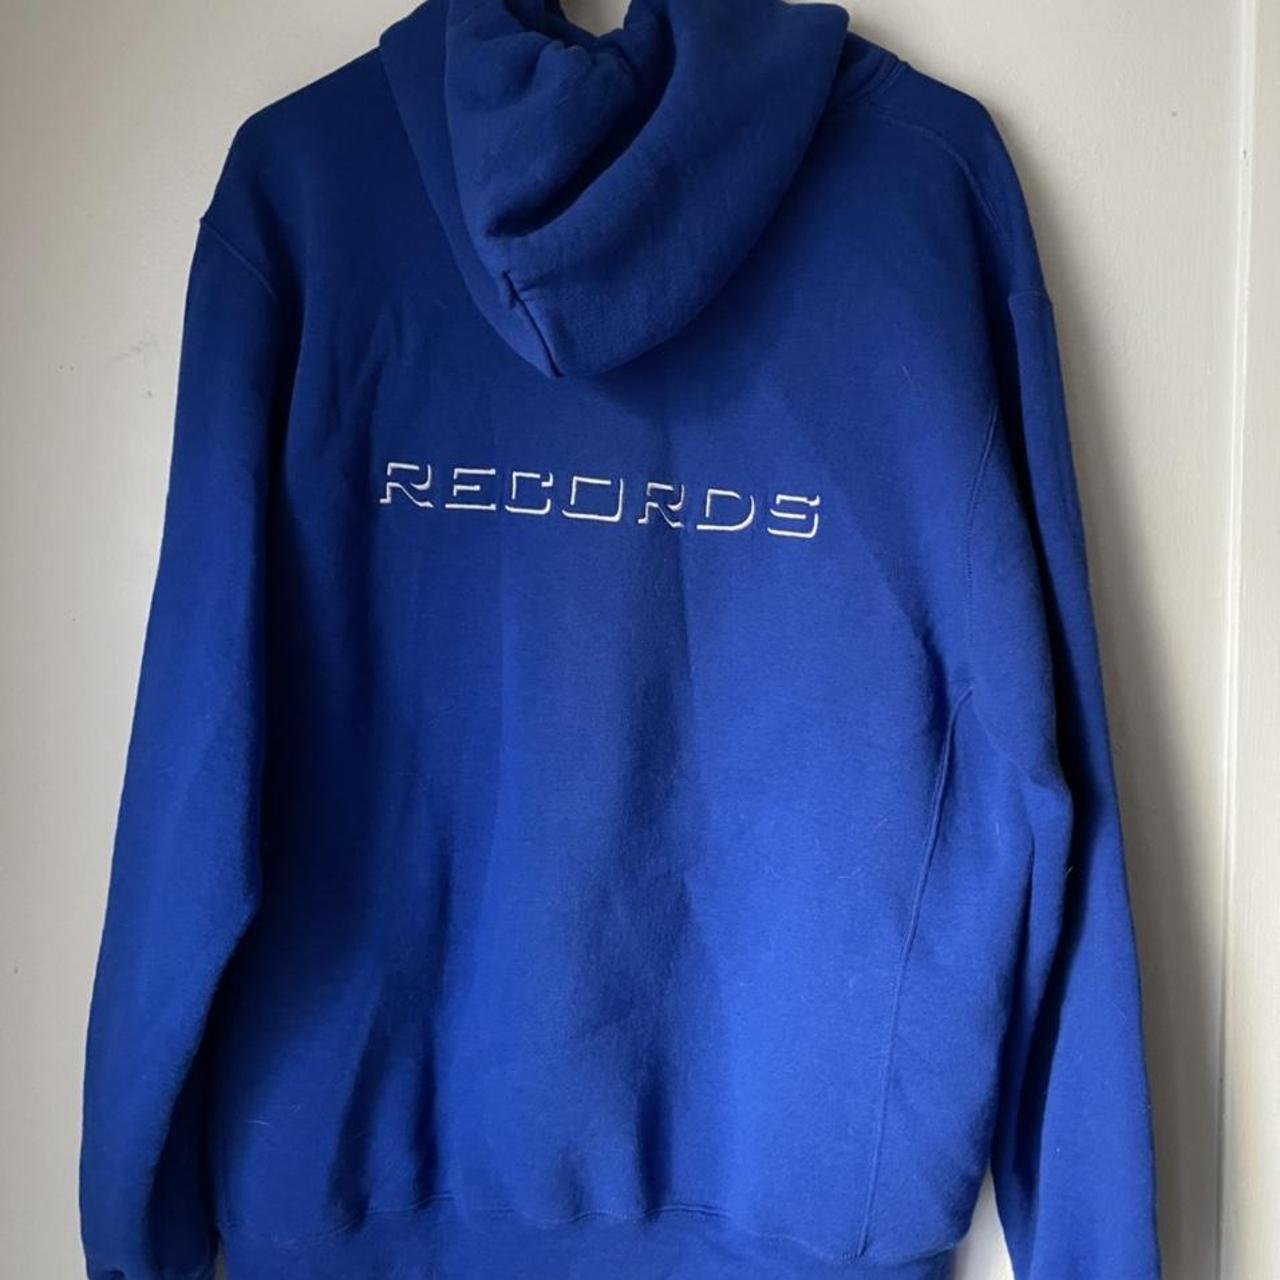 Product Image 2 - Cousin Records Hoodie. Brand new,